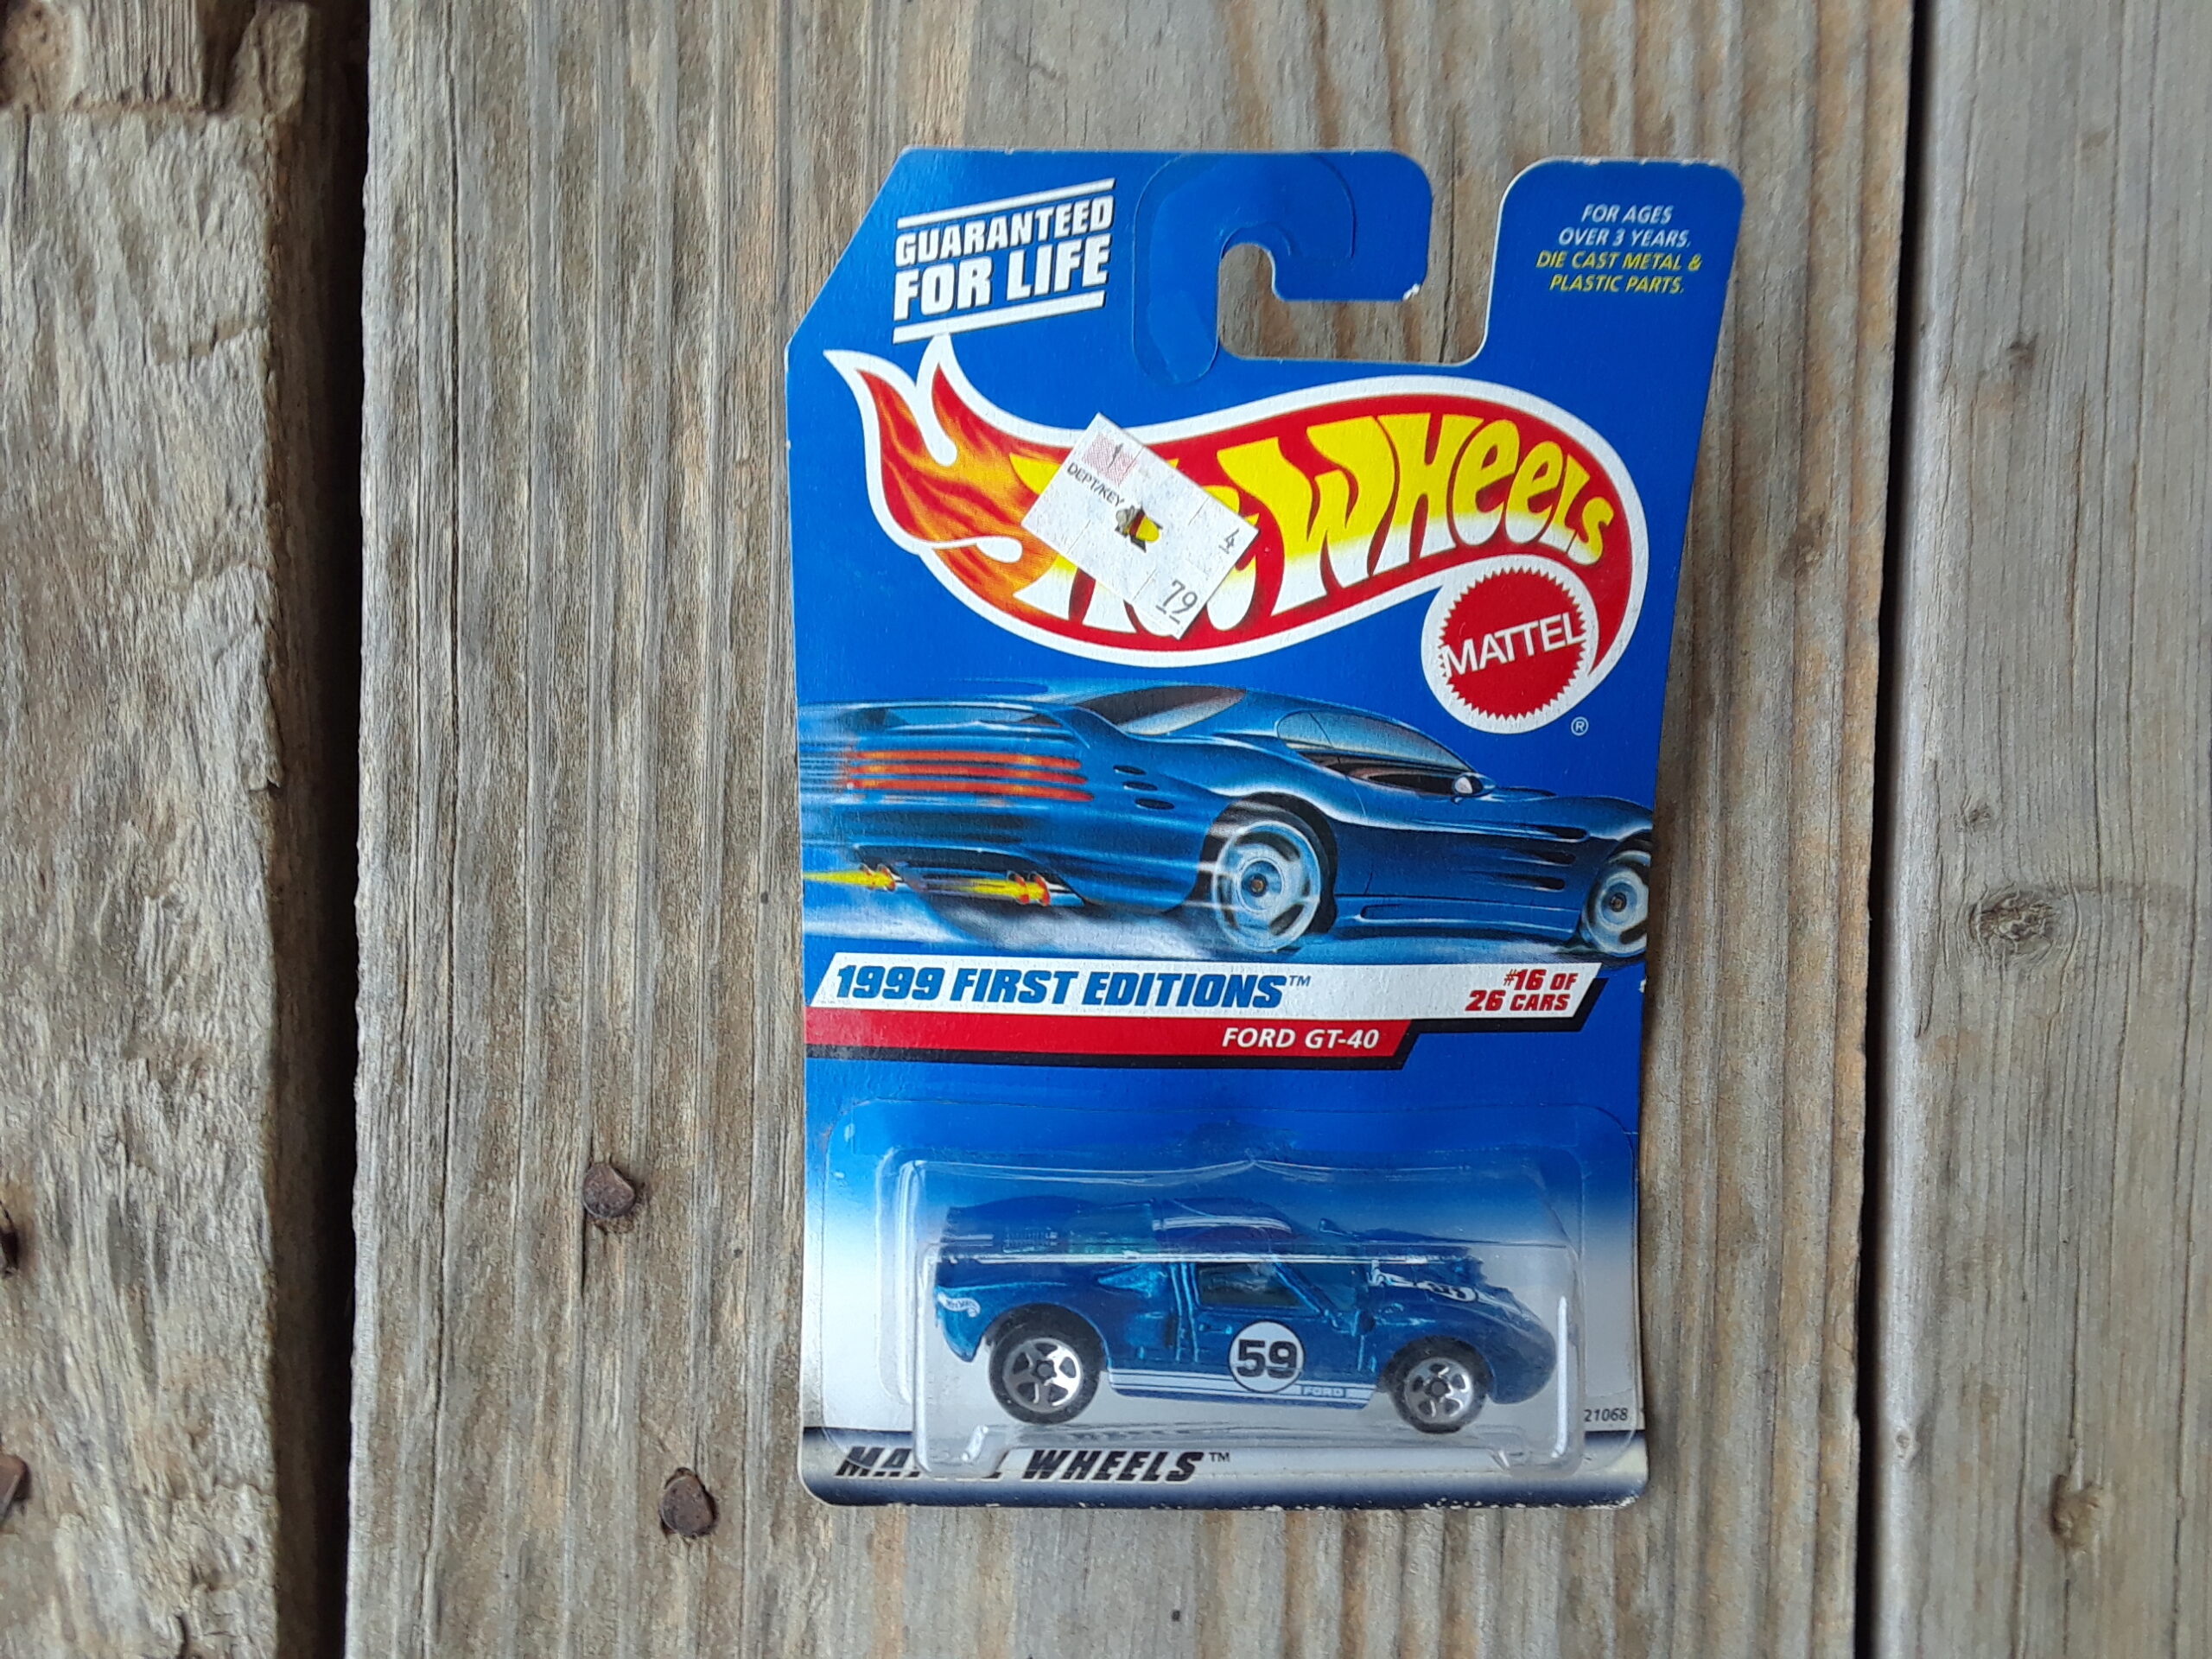 Hot Wheels 1999 First Editions Ford GT-40